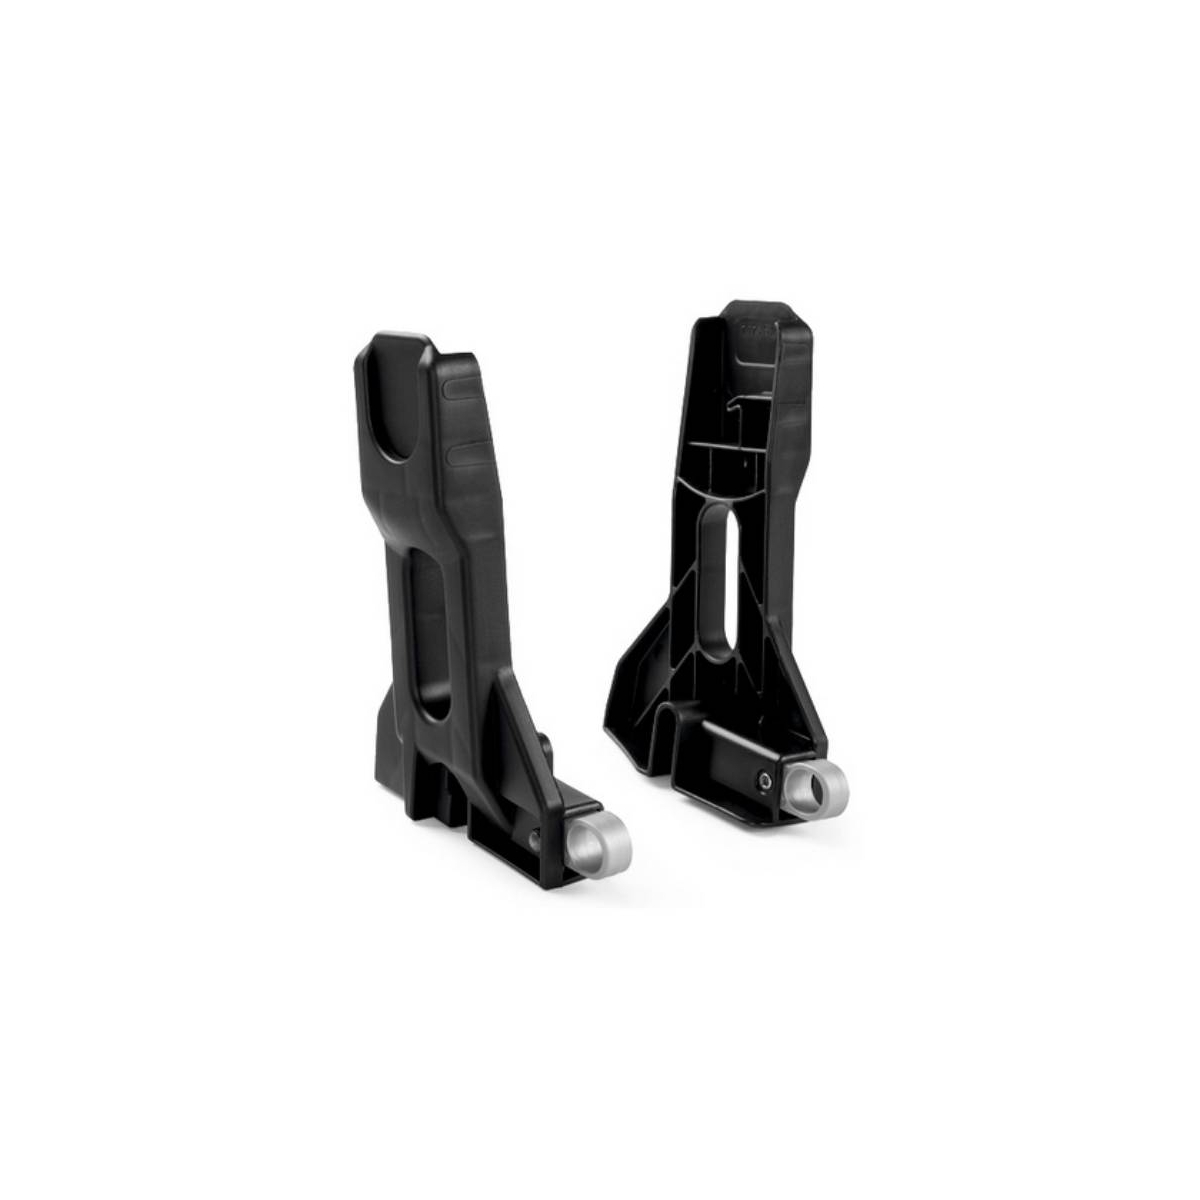 Peg Perego Car Seat Adapters for Maxi Cosi (CL)